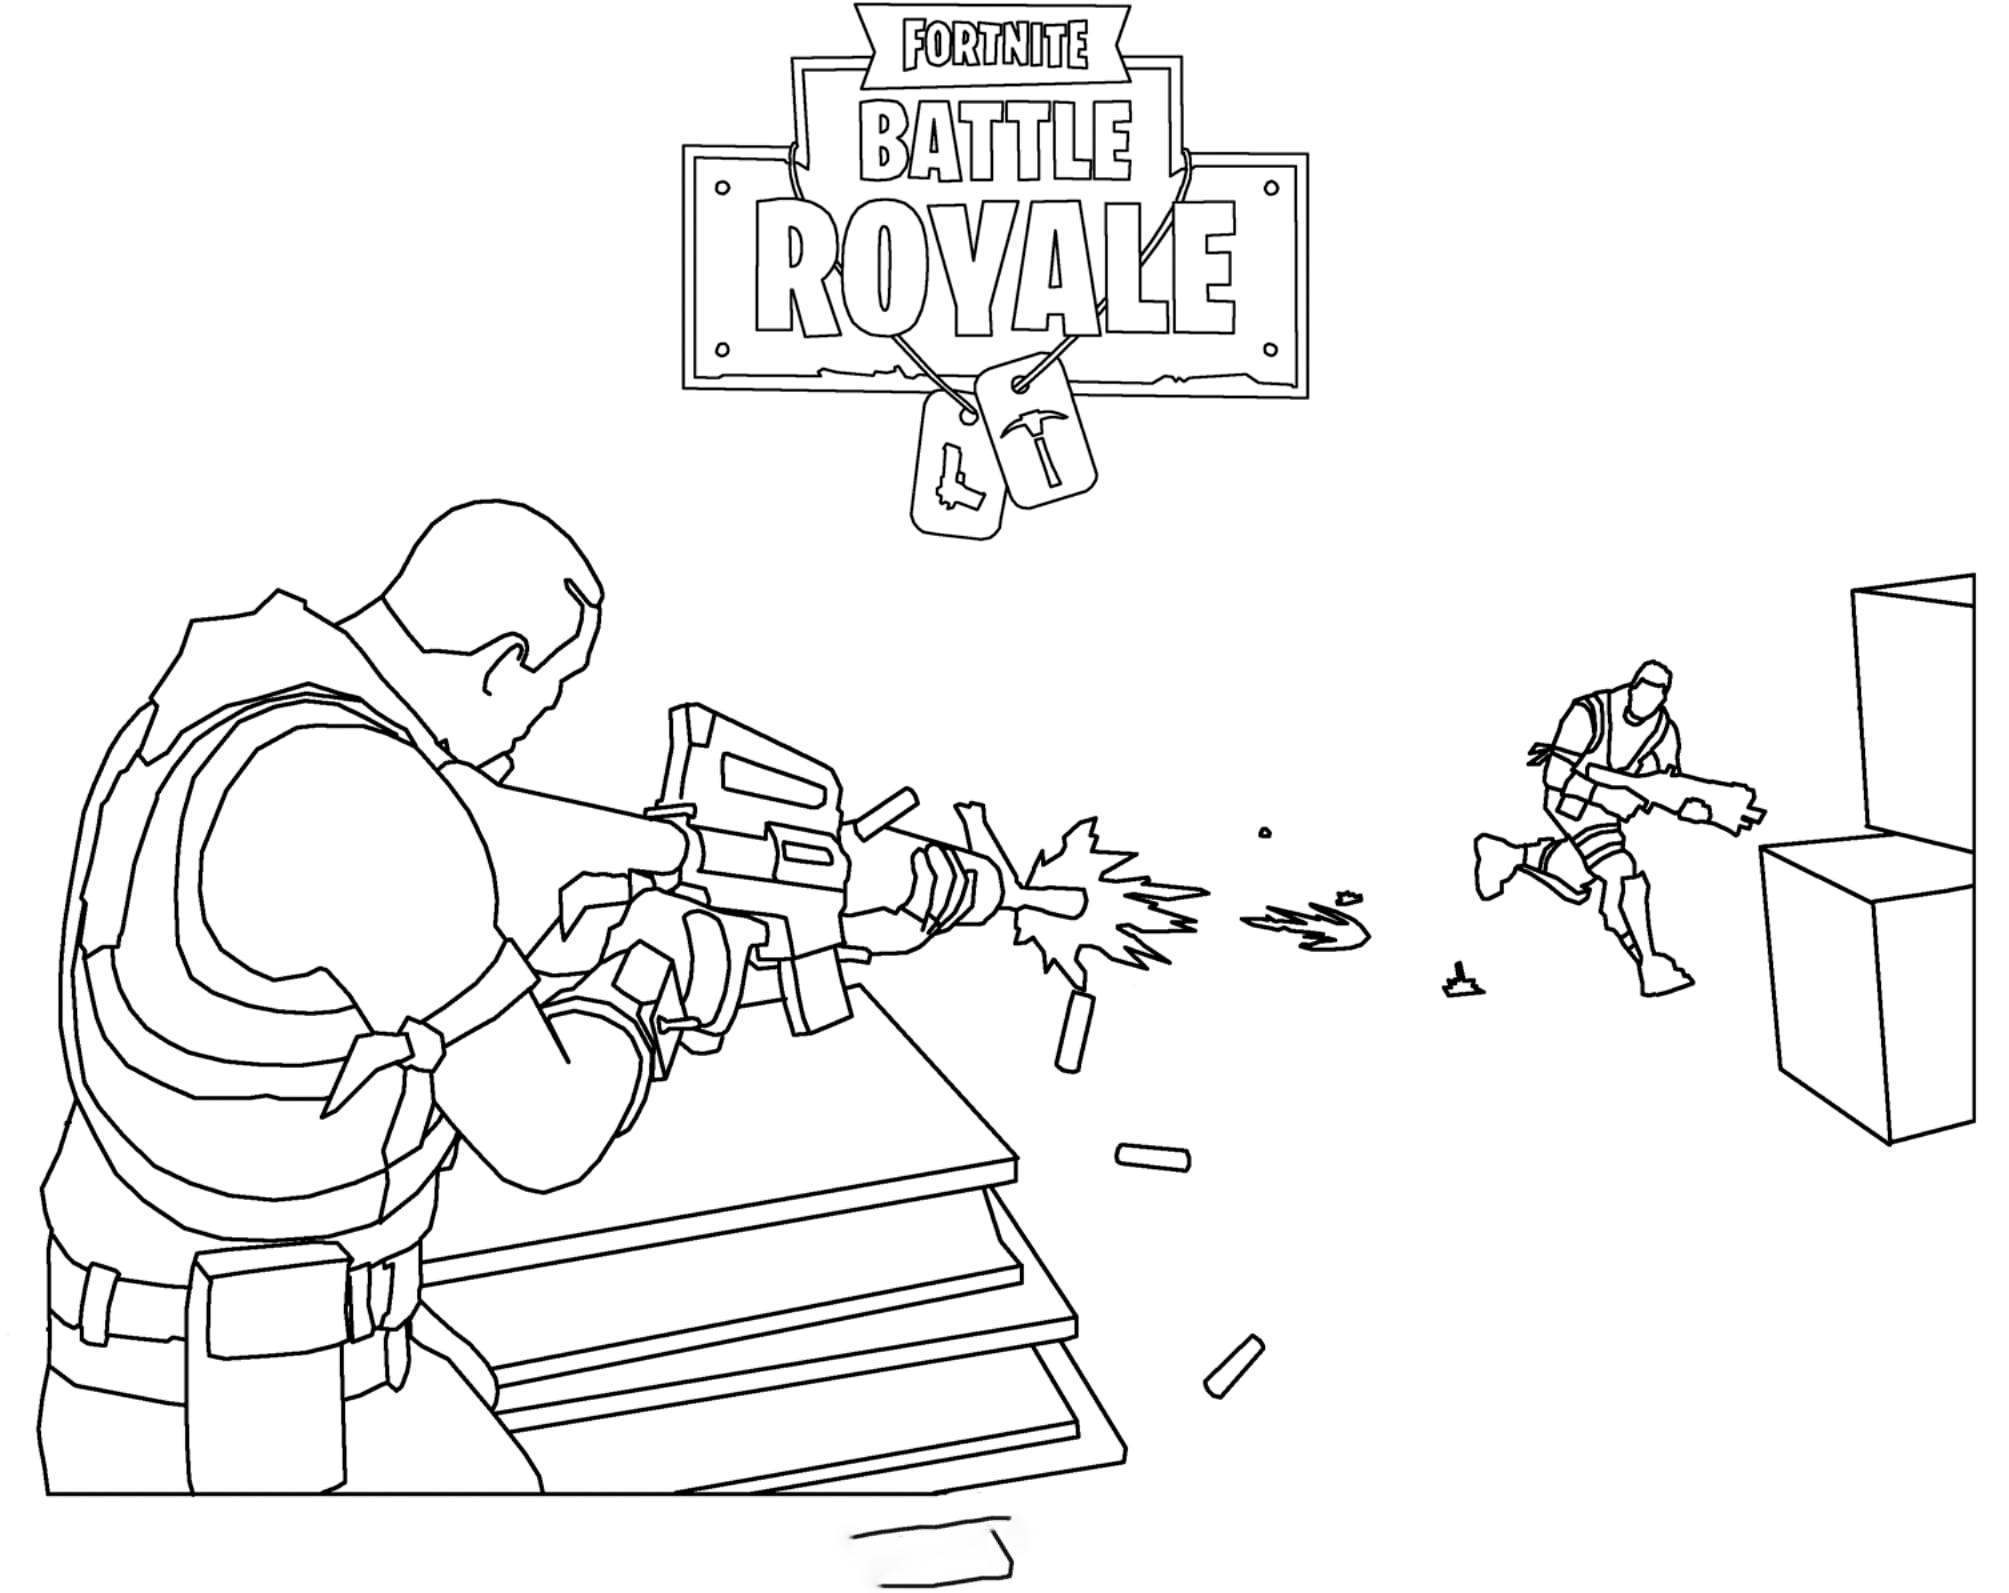 Free Easy Fortnite Skin Coloring Pages Scene Coloring Sheets printable